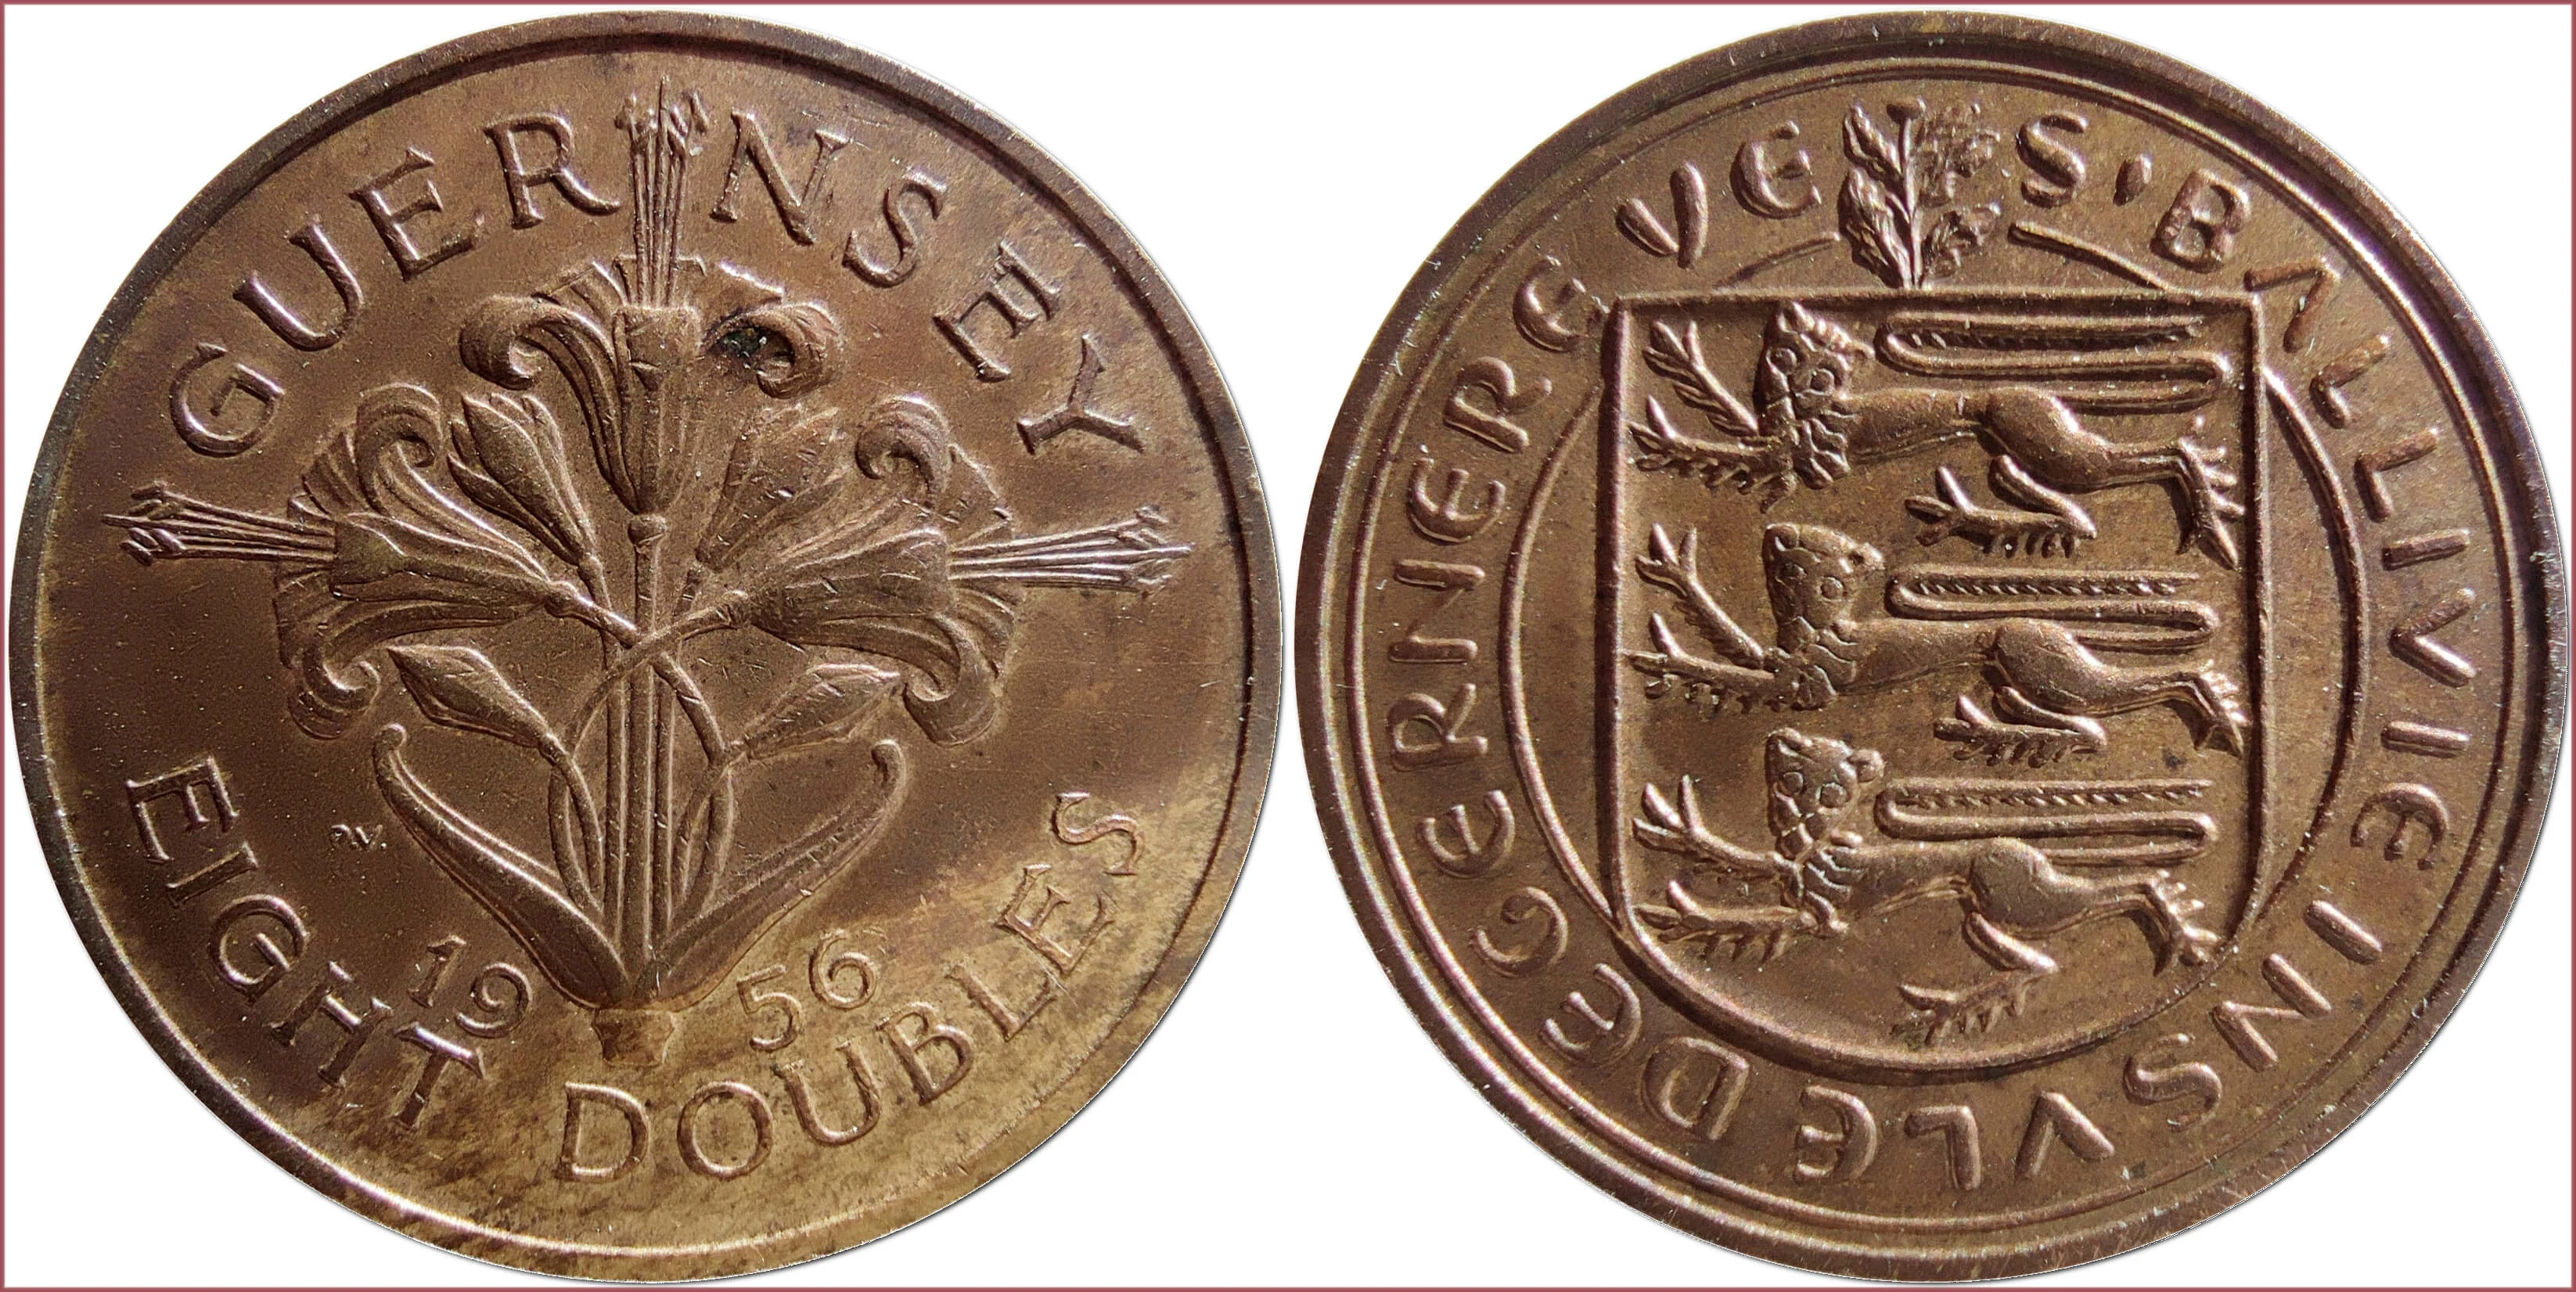 8 doubles, 1956: Bailiwick of Guernsey